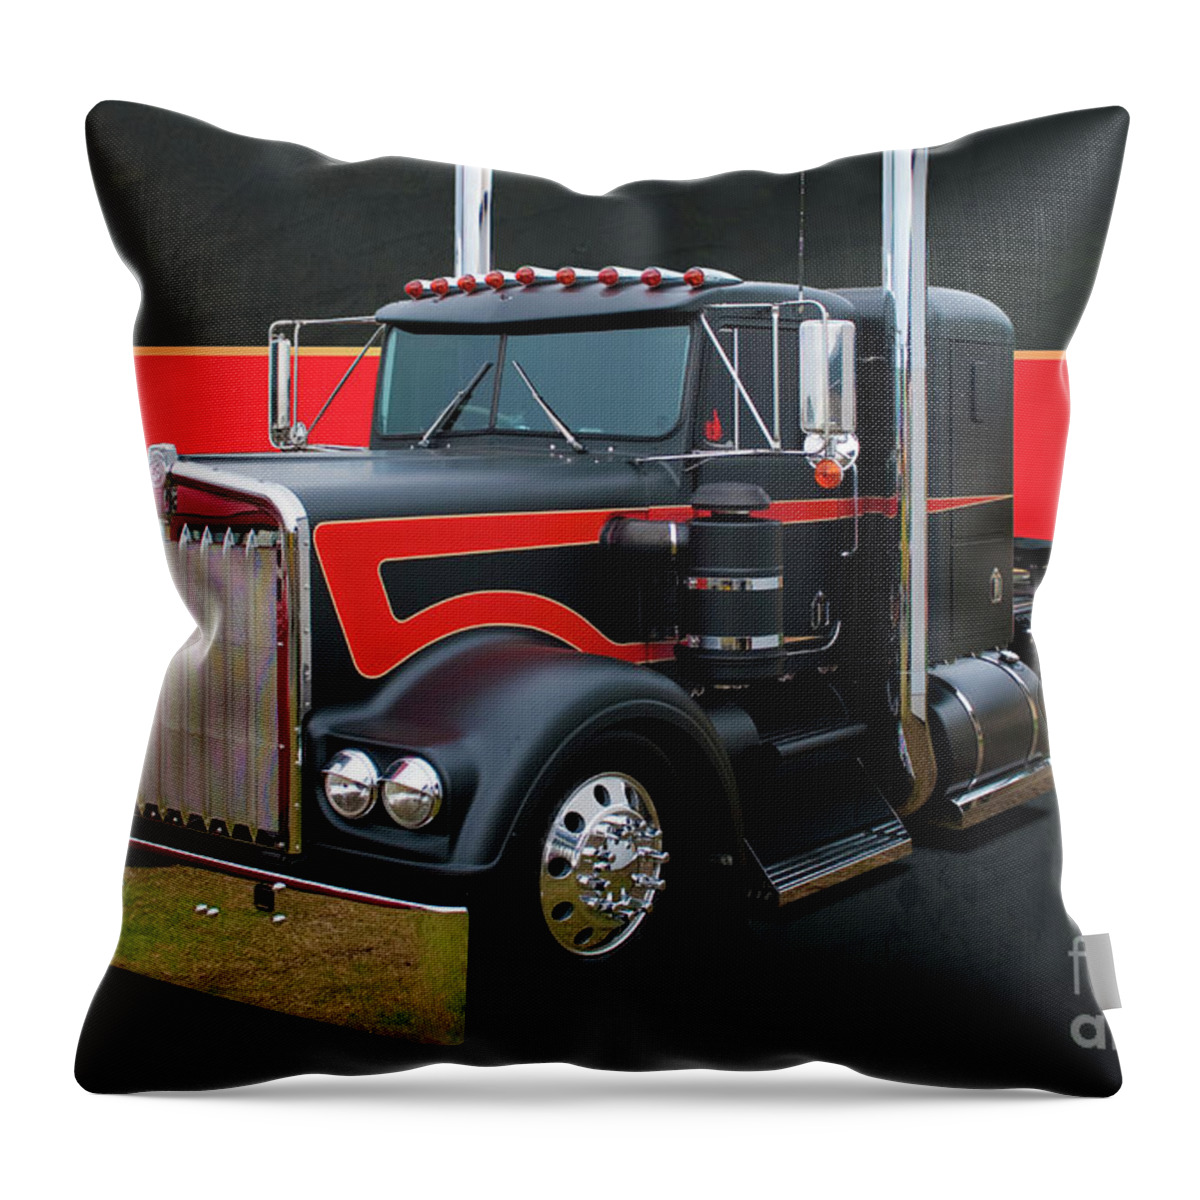 Rig Throw Pillow featuring the photograph Rat Rig by Stuart Row